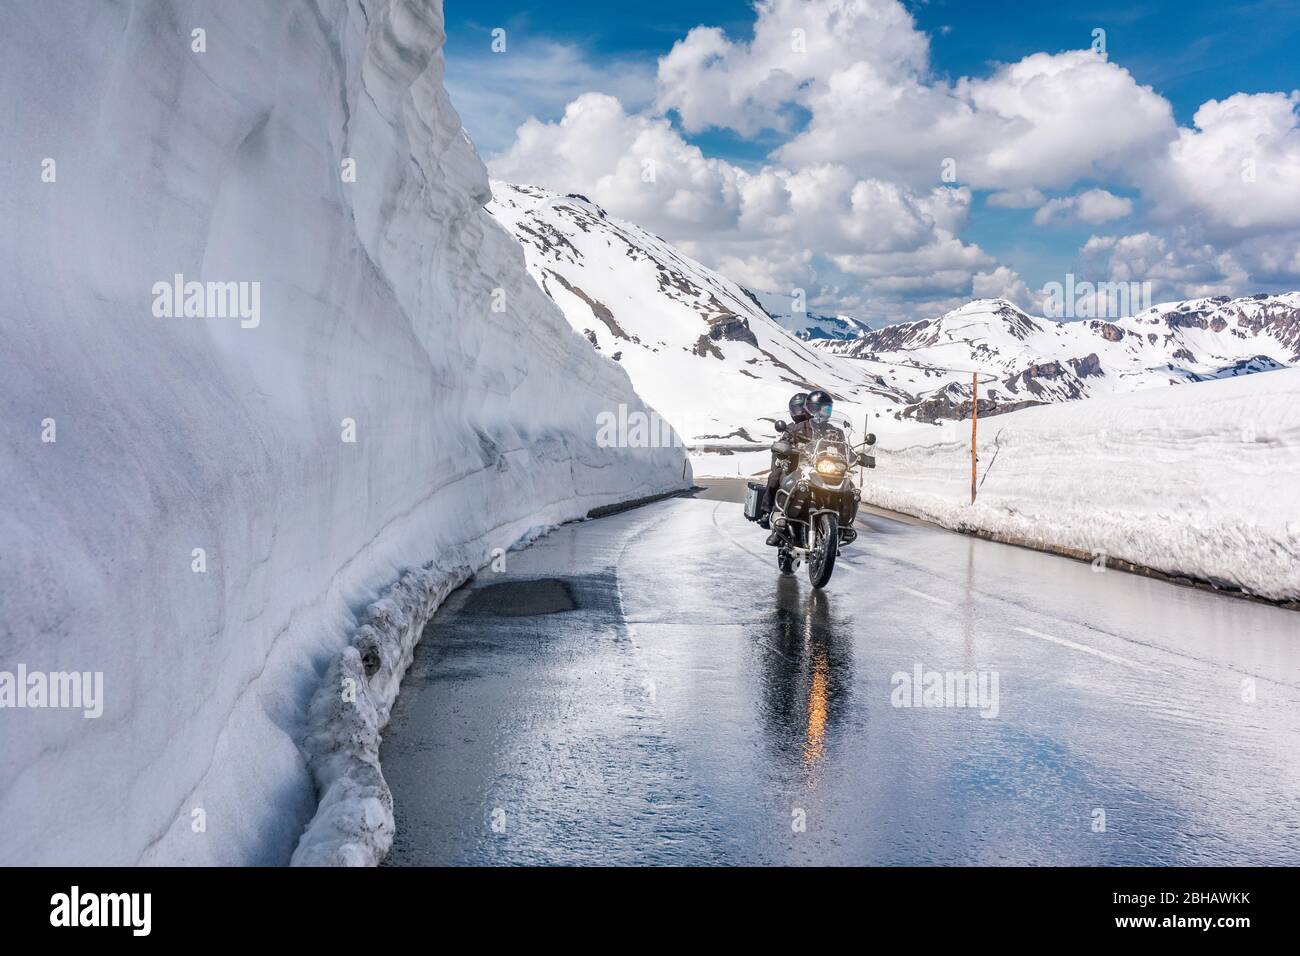 Motorbike near the Hochtor pass with very high snow on the sides of the wet road, Grossglockner High Alpine Mountain Road, Hohe Tauern National Park, Salzburg, Austria, Europe Stock Photo